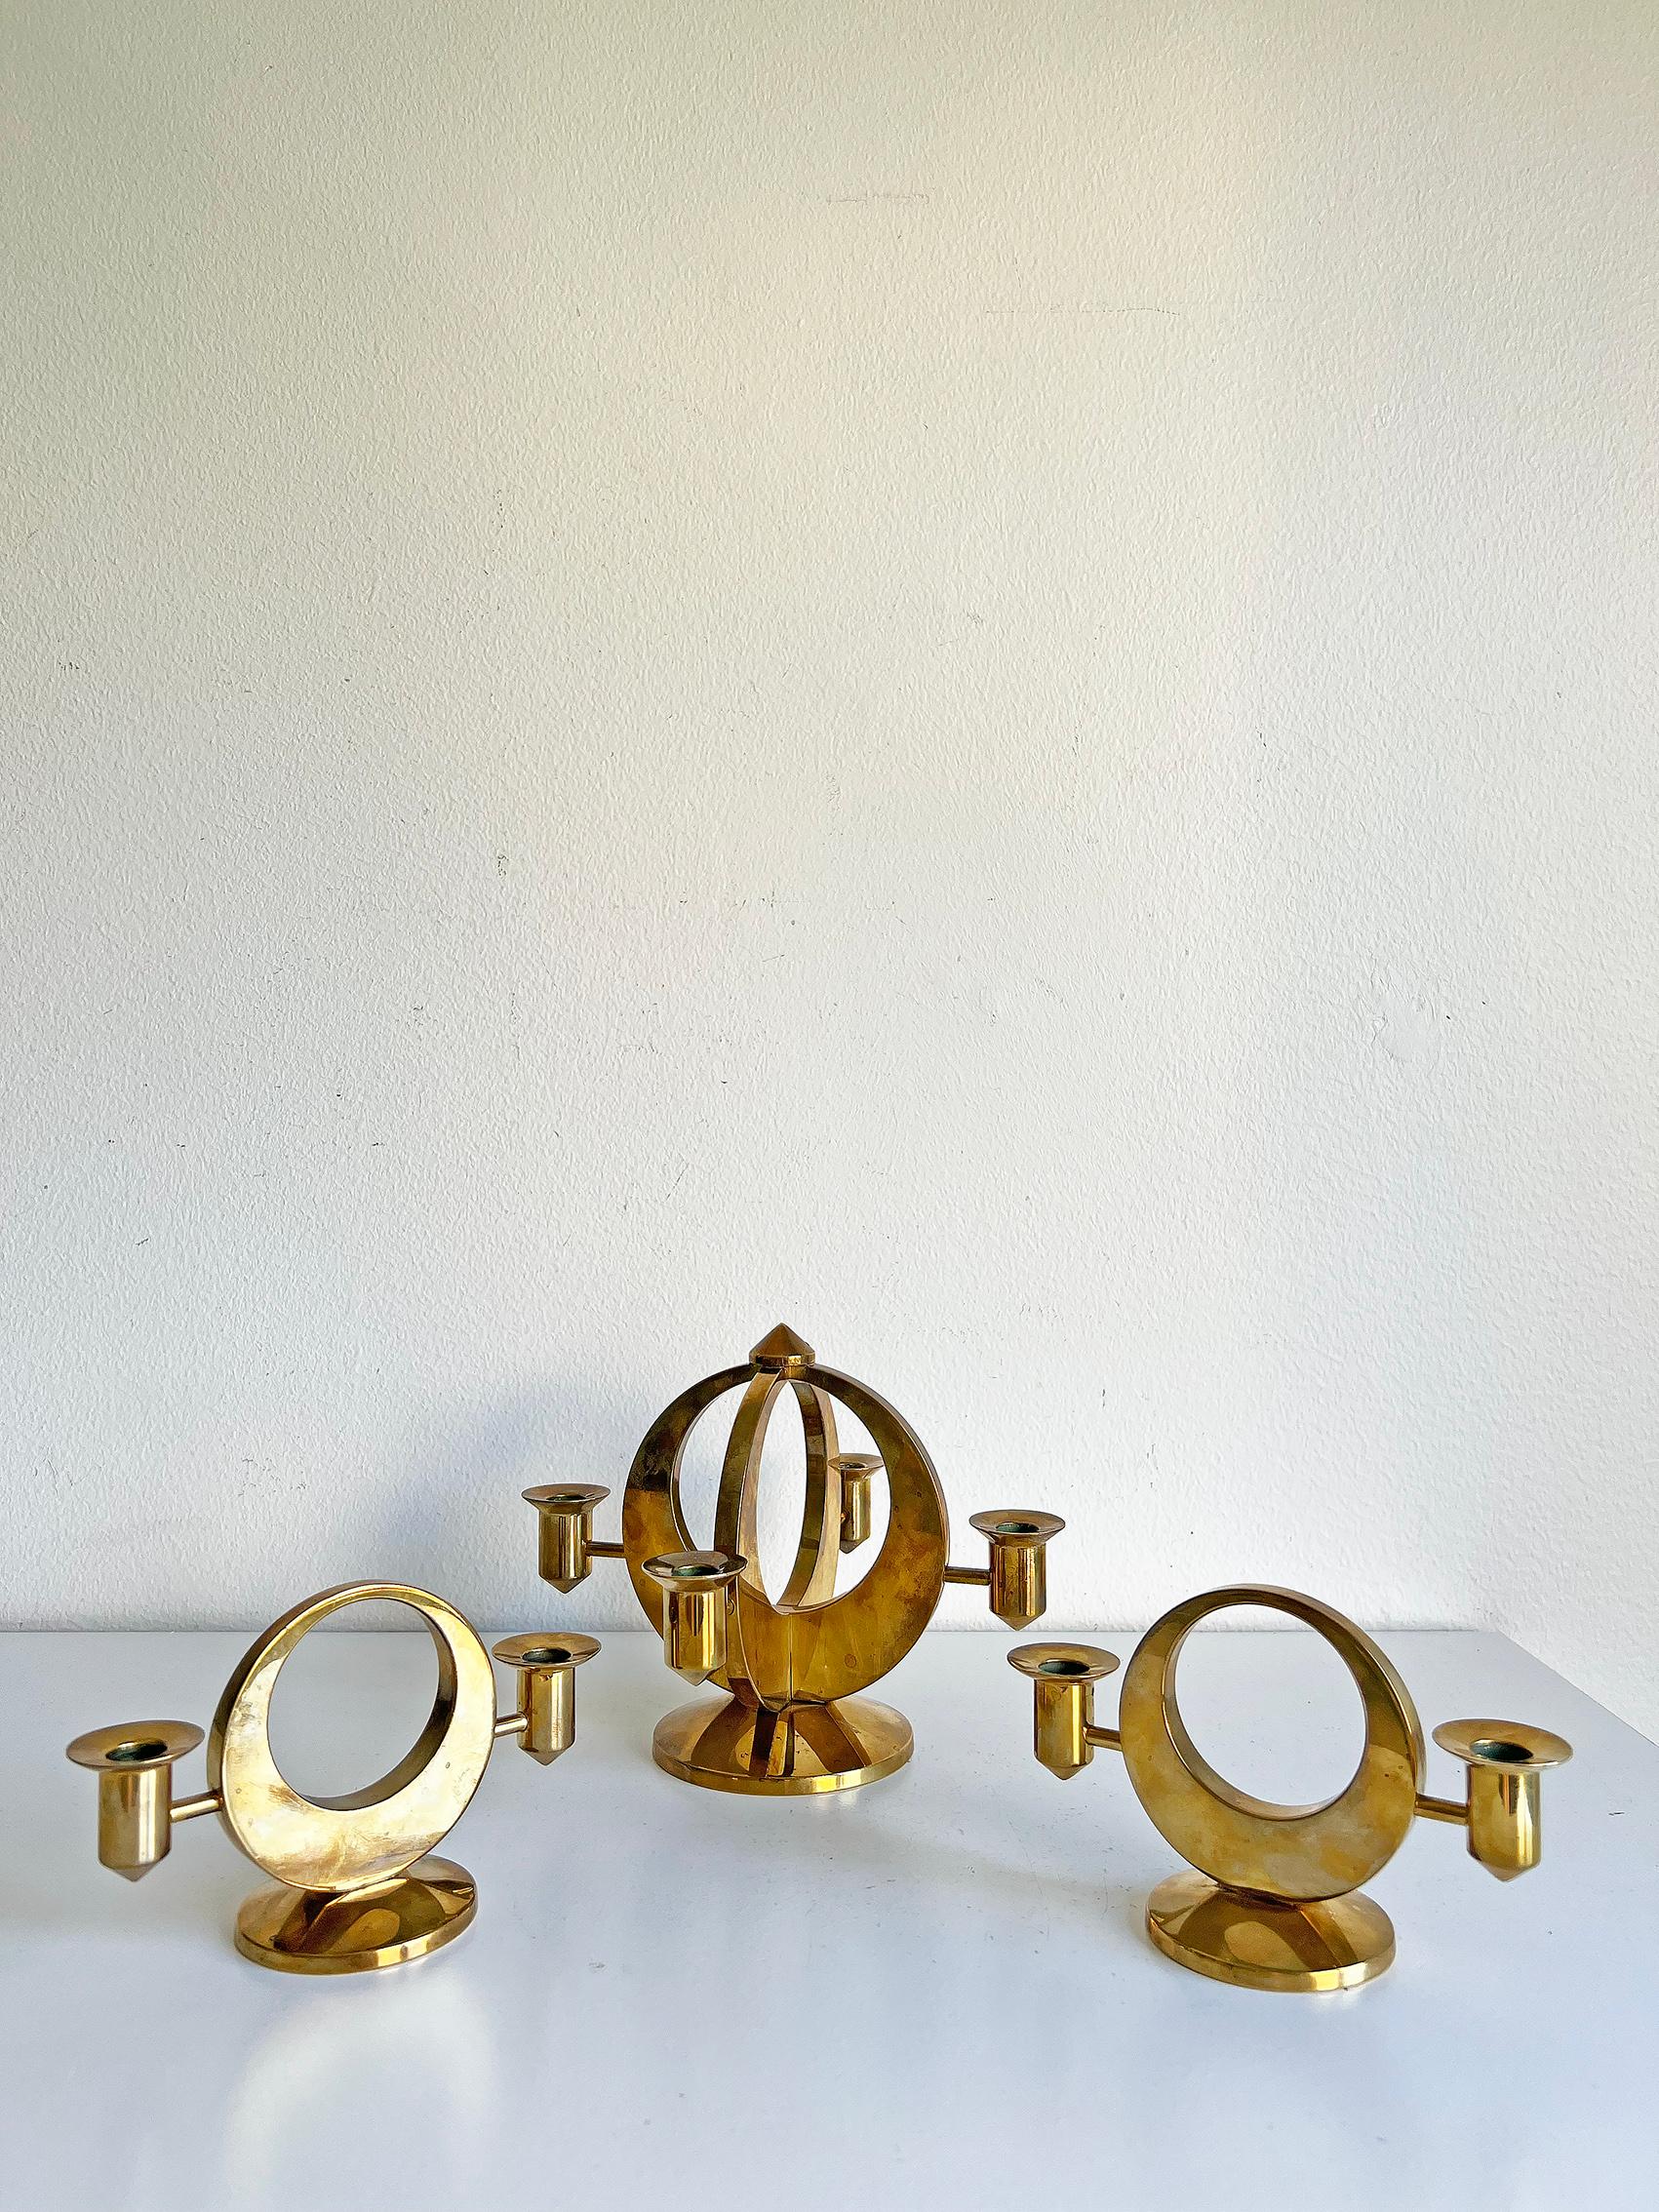 Set of 3 candlesticks in brass, designed by Arthur Pe, circa 1950s. 
Produced in his own studio Kolbäck in Sweden. 
Good vintage condition. Brass with patina. 

2 Different measurements: 
Height 13.5 cm, width 18.5 cm, depth 18.5 cm 
Height